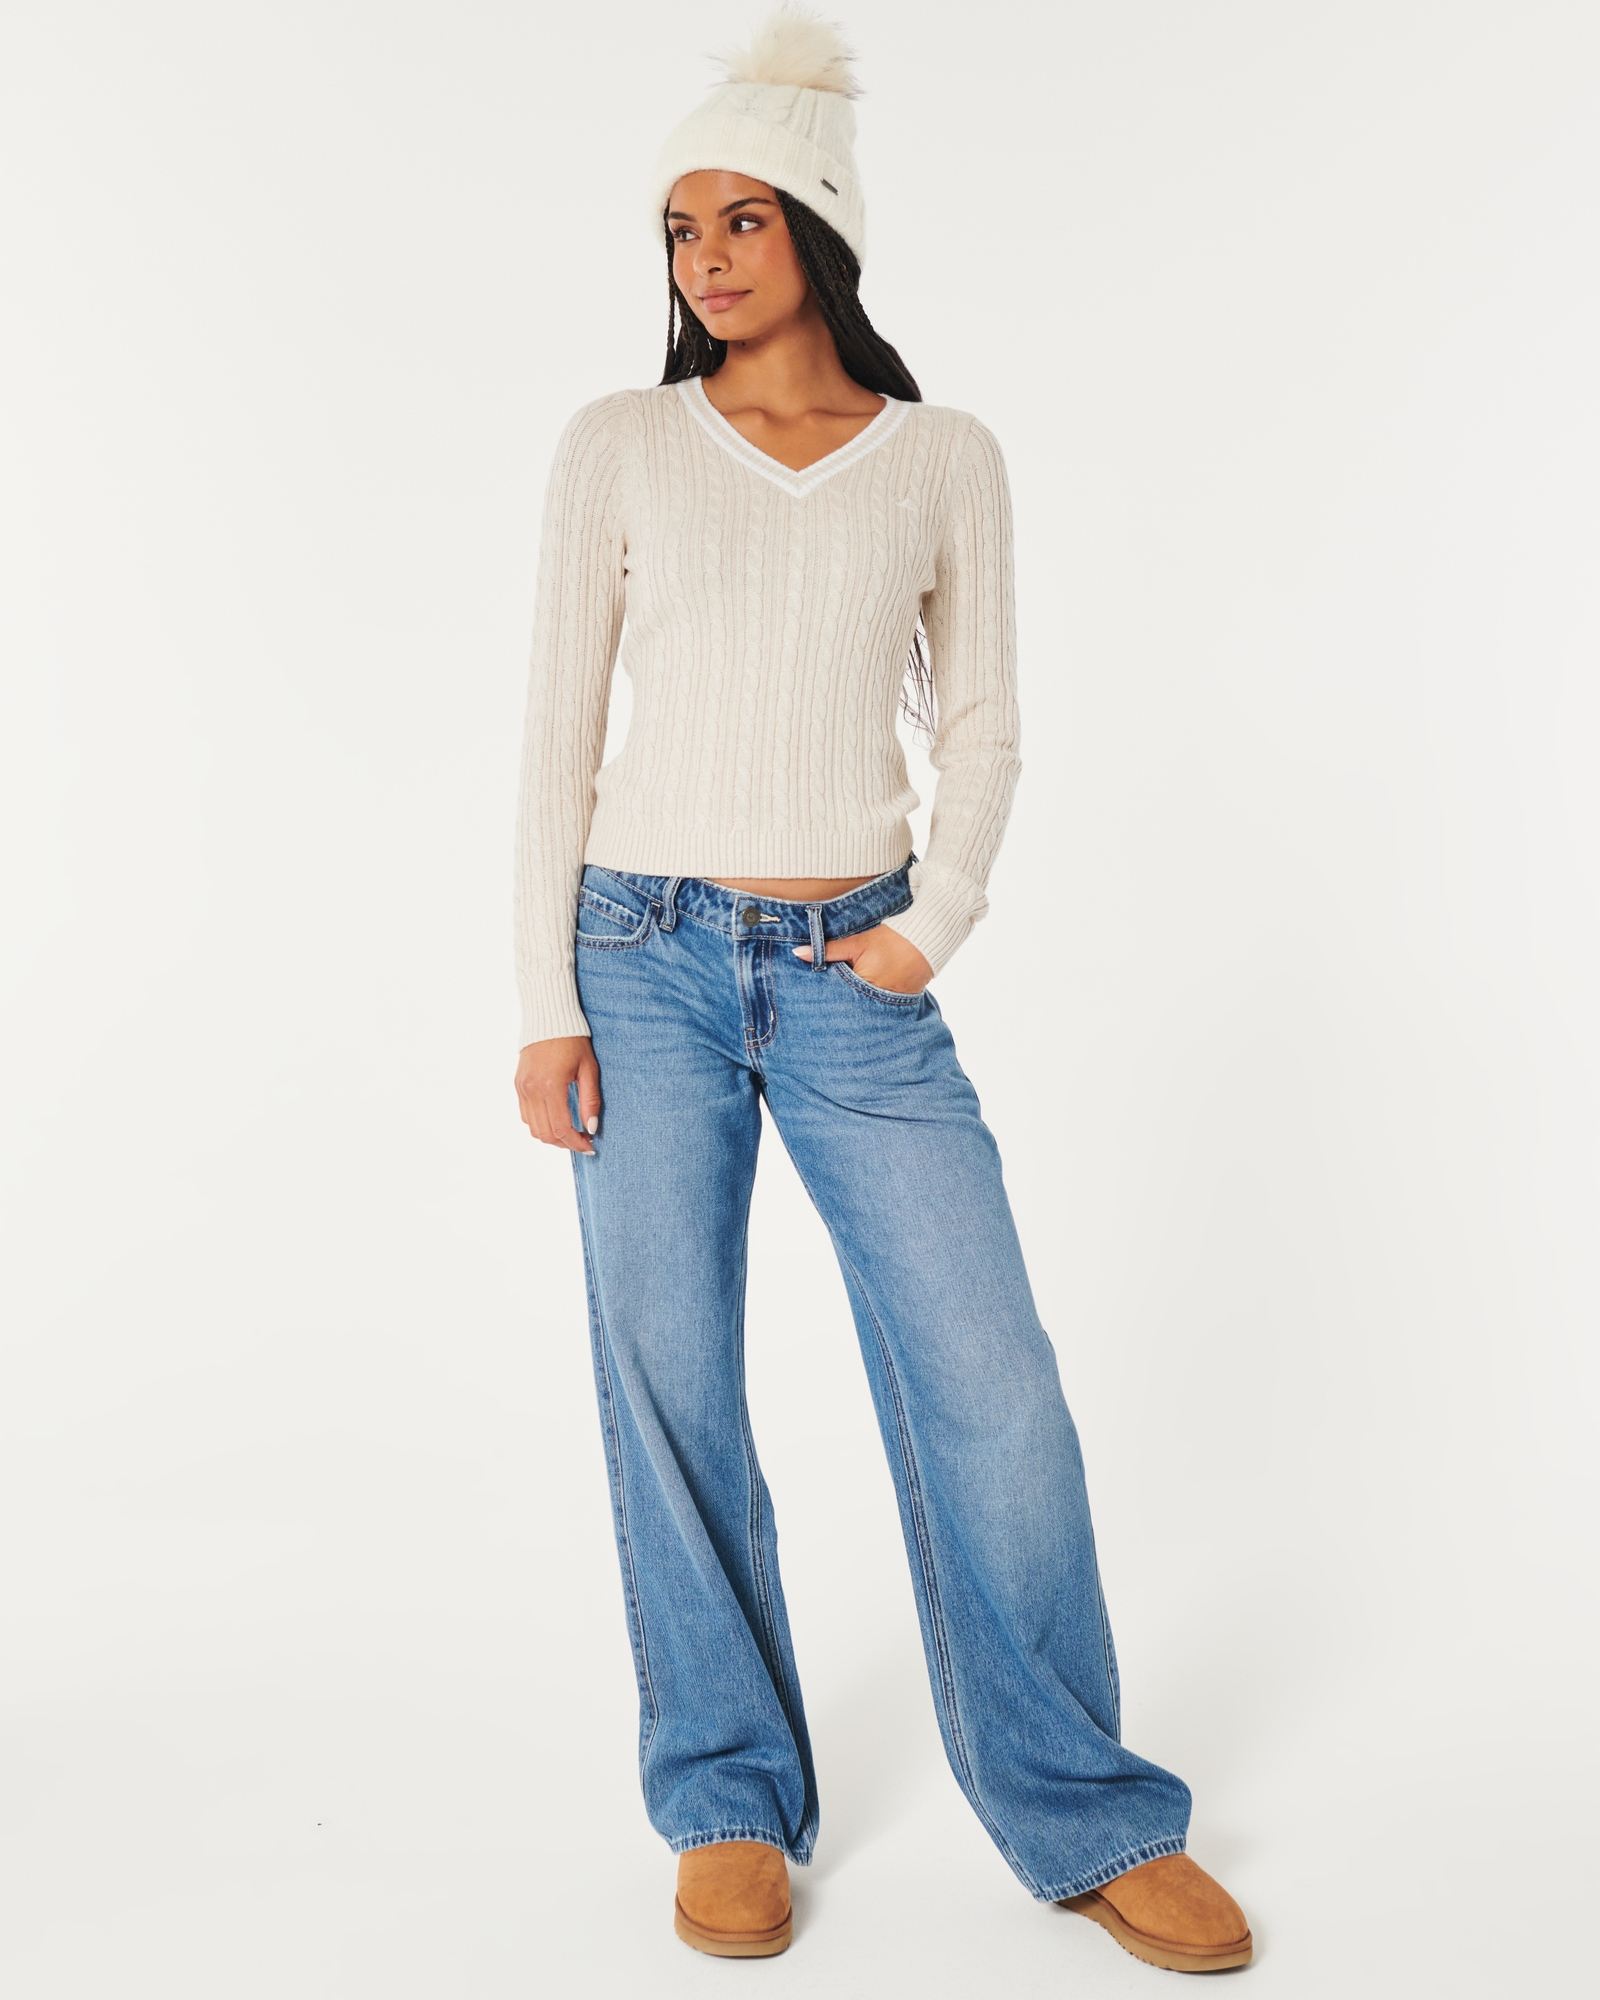 Women's Cable-Knit Icon V-Neck Sweater, Women's